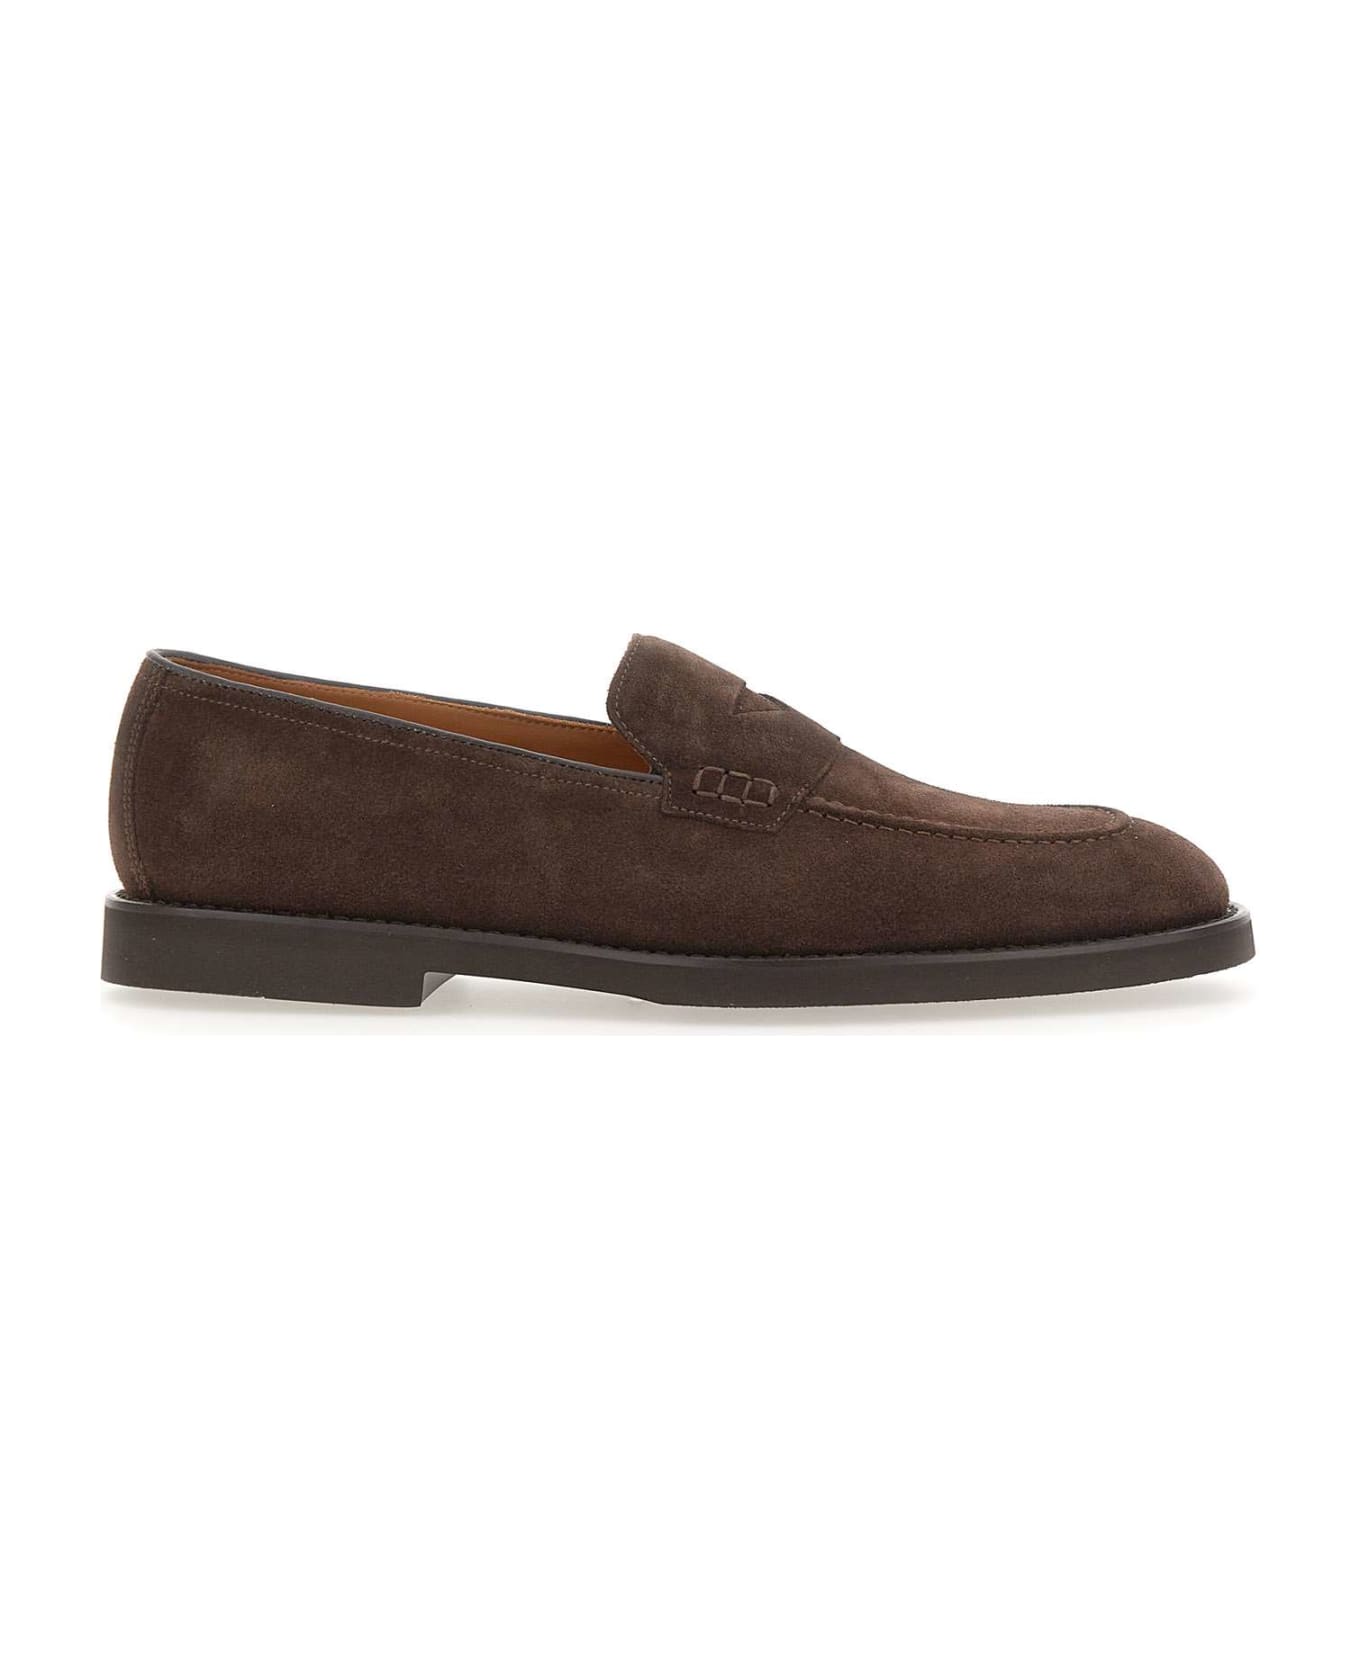 Doucal's "wash" Suede Moccasins - BROWN ローファー＆デッキシューズ